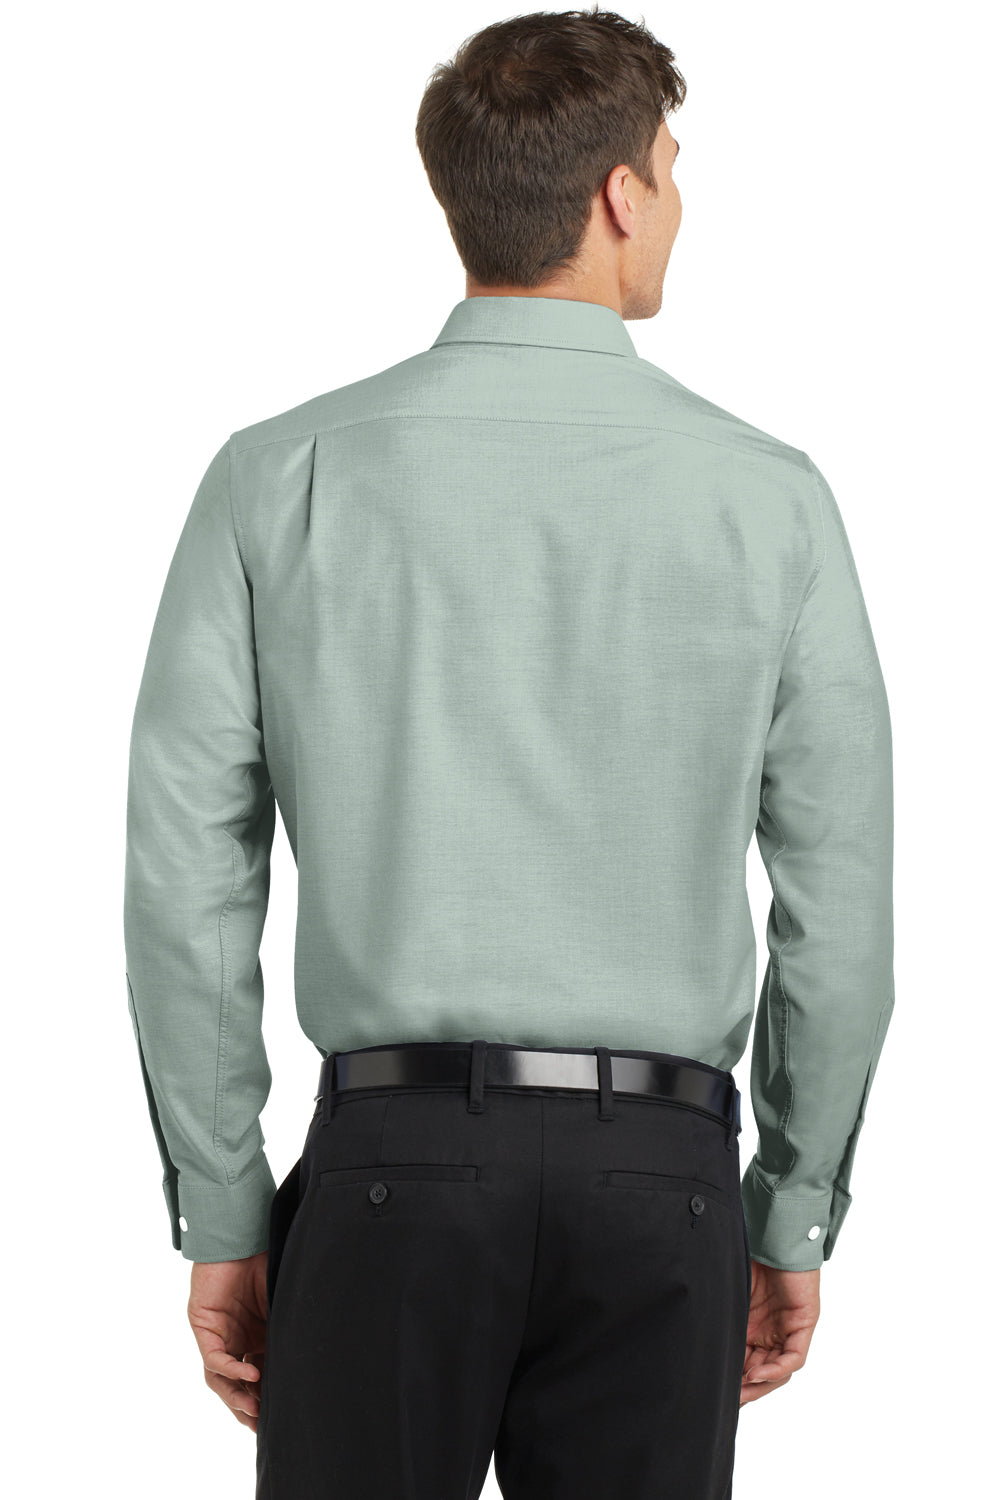 Port Authority S658 Mens SuperPro Oxford Wrinkle Resistant Long Sleeve Button Down Shirt w/ Pocket Green Back